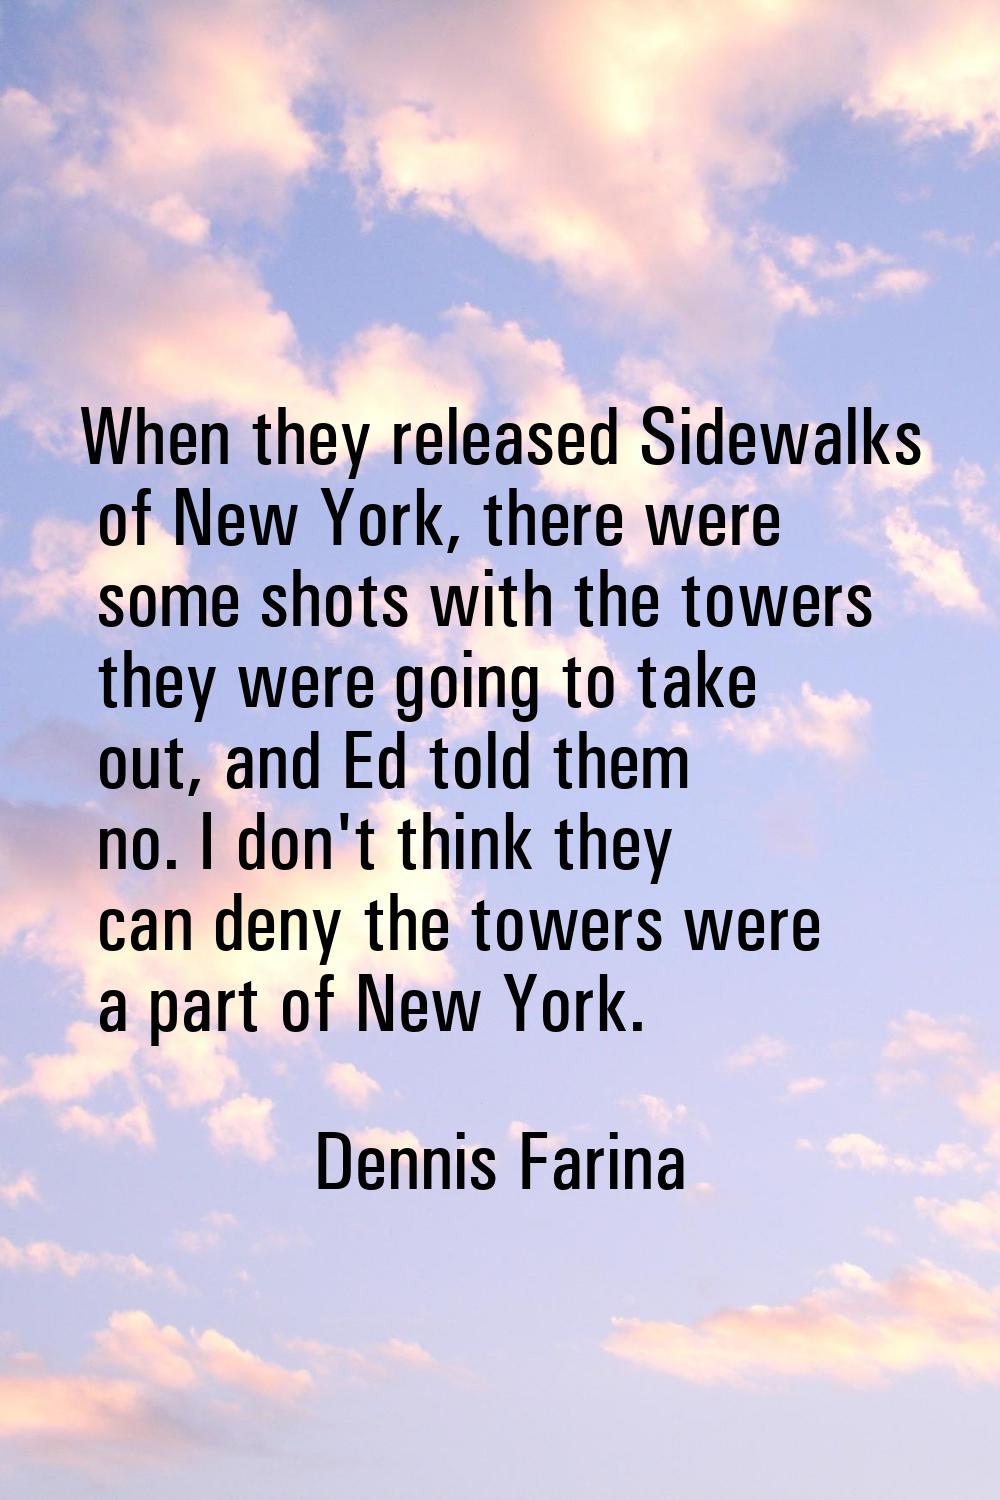 When they released Sidewalks of New York, there were some shots with the towers they were going to 